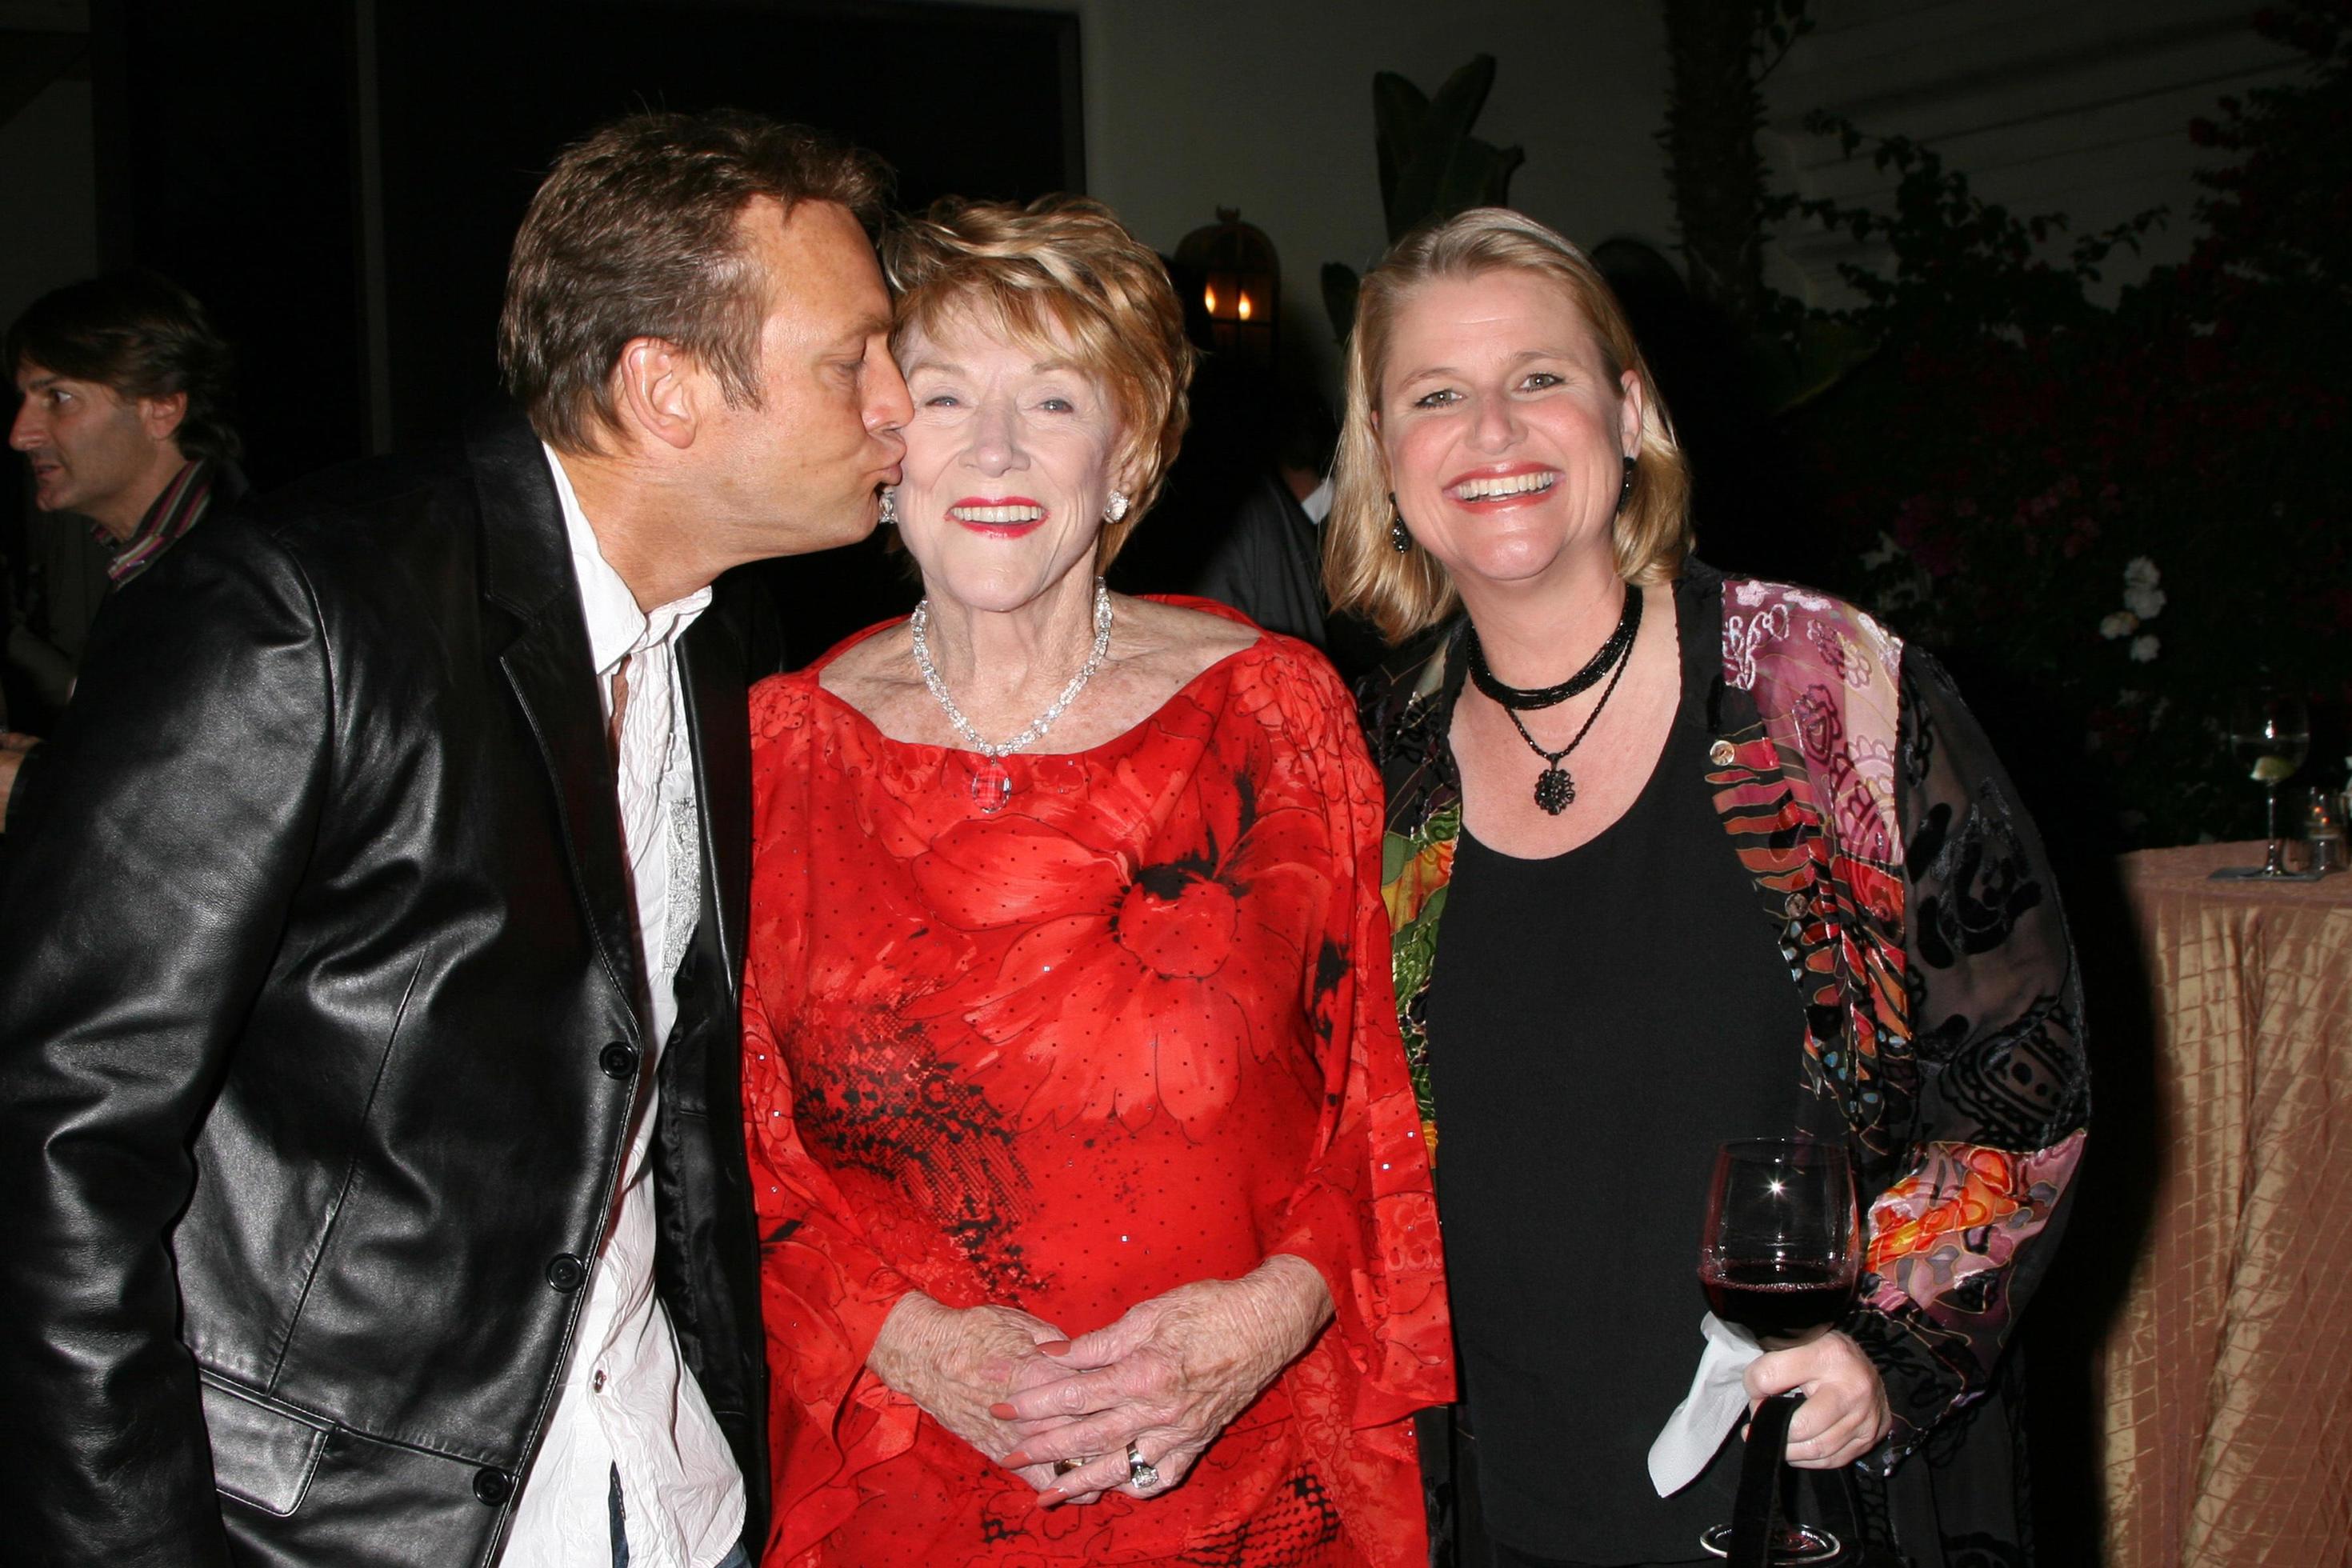 Doug Davidson, Jeanne Cooper, and Cindy Fisher at a party